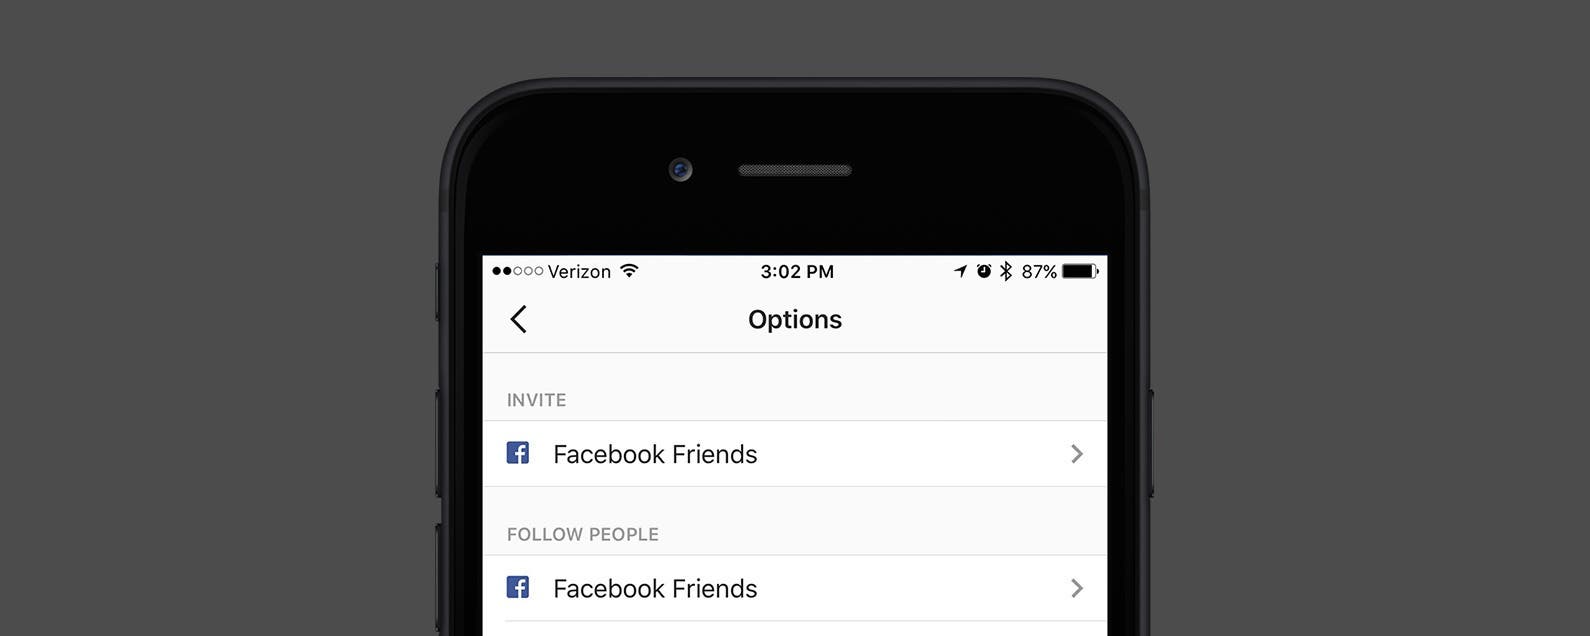 how to invite your facebook friend to join instagram - how to invite to follow on instagram